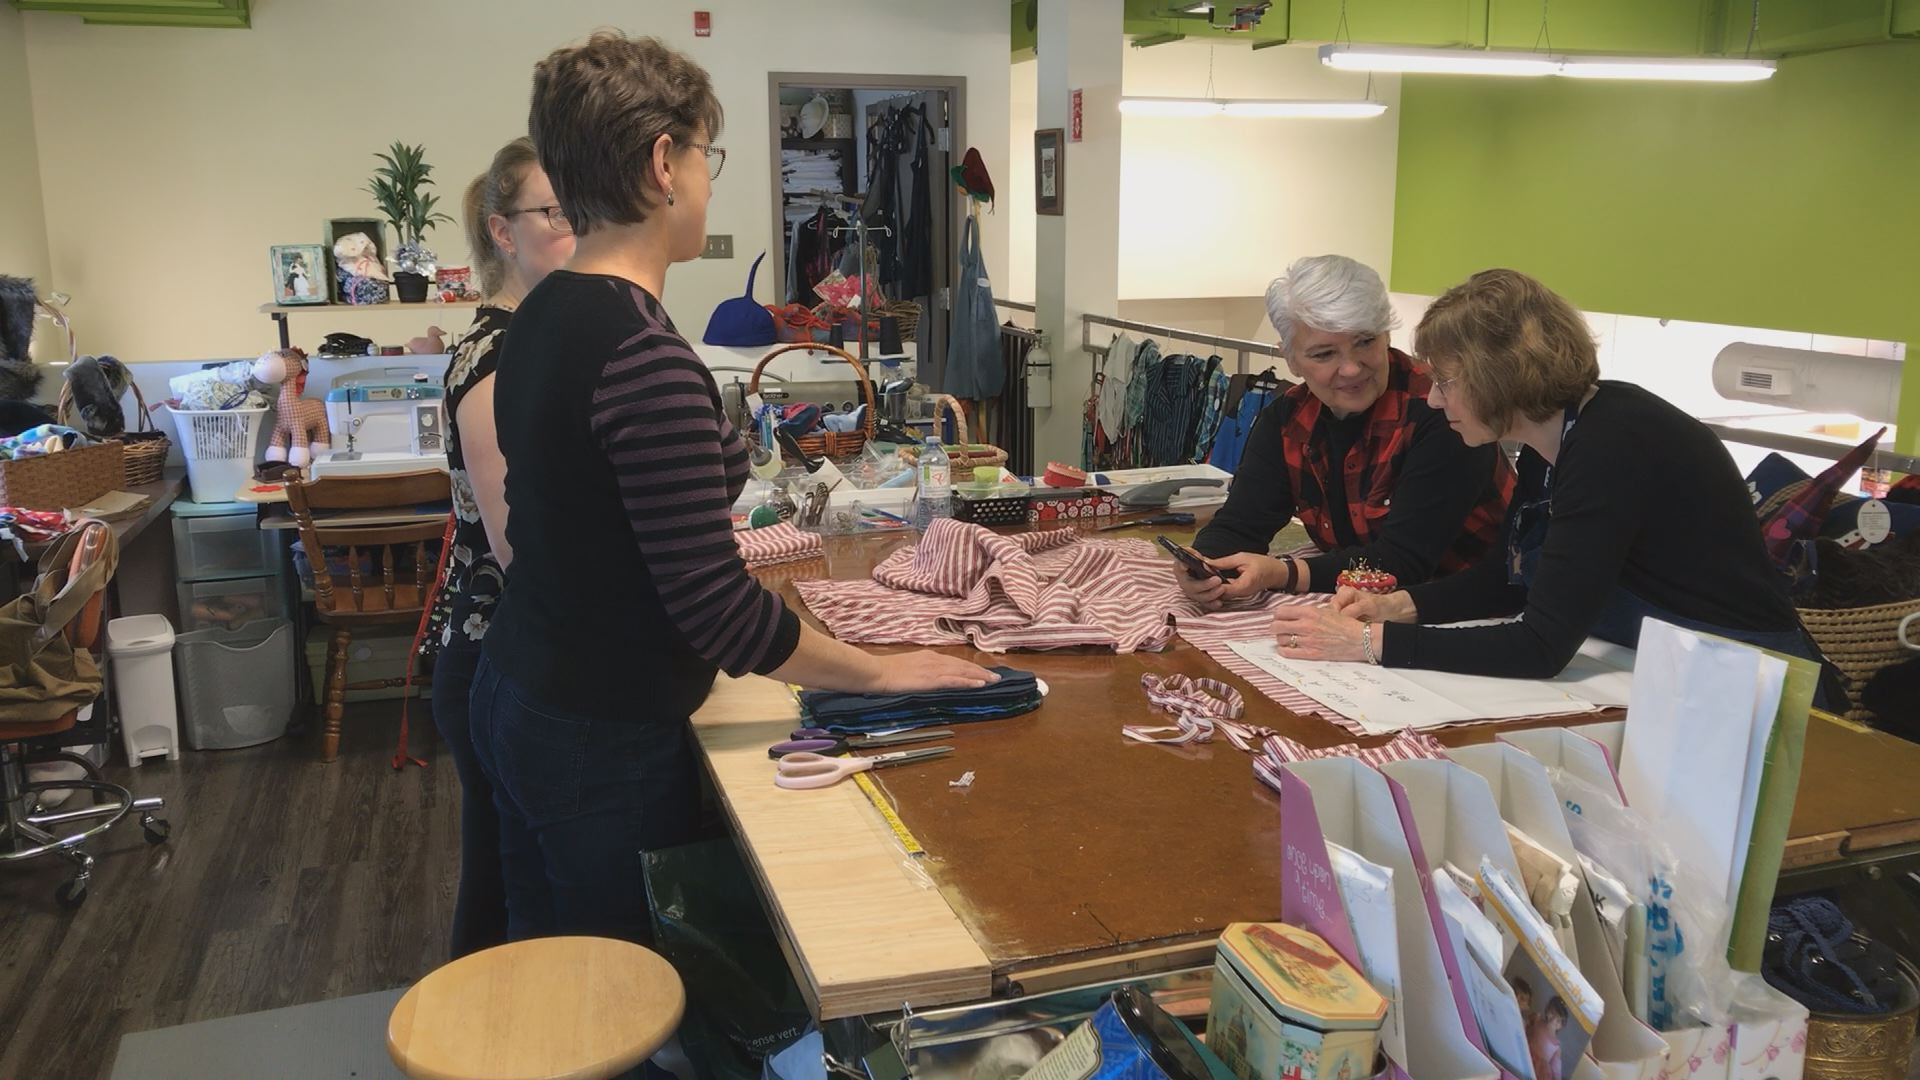 A tote bag made with seatbelts? Montreal area thrift shop gets creative for its community